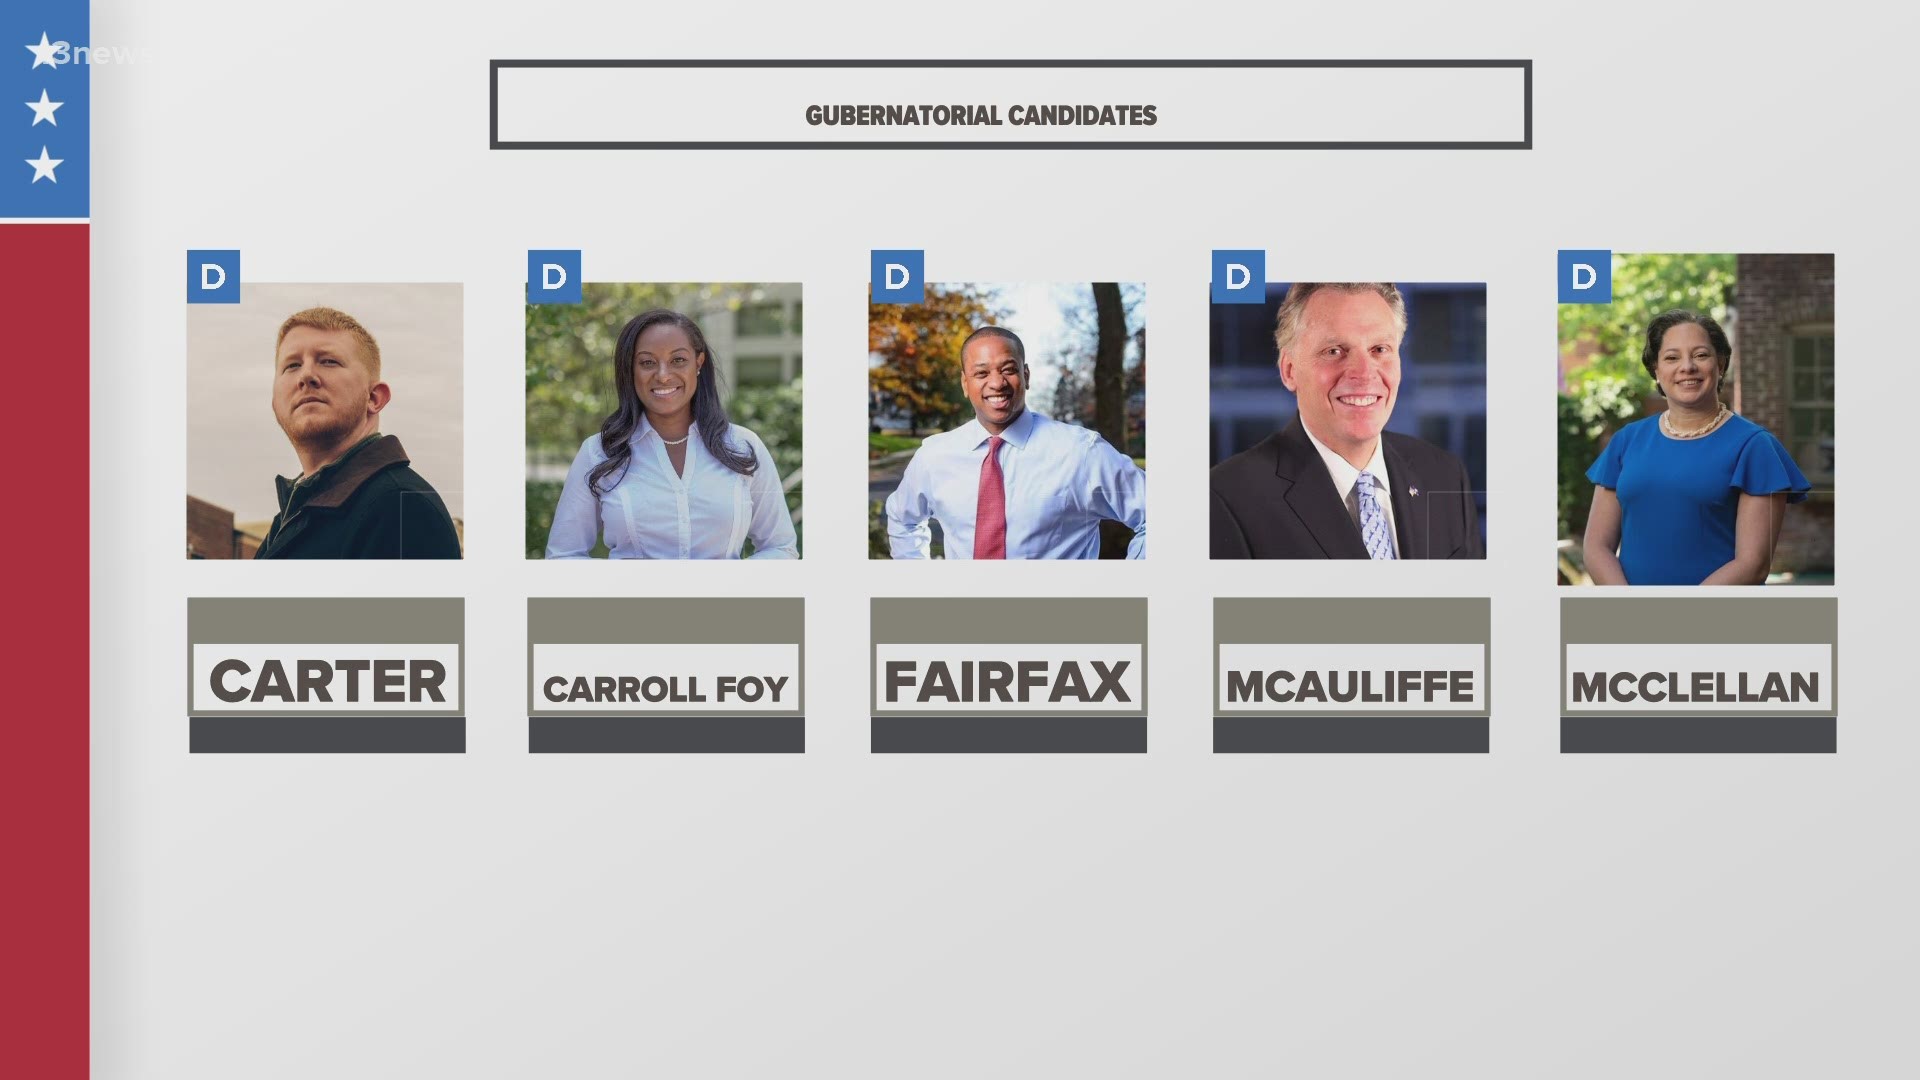 Five candidates are competing for the nomination in Tuesday's primary, with former Gov. Terry McAuliffe seen as the heavy favorite.